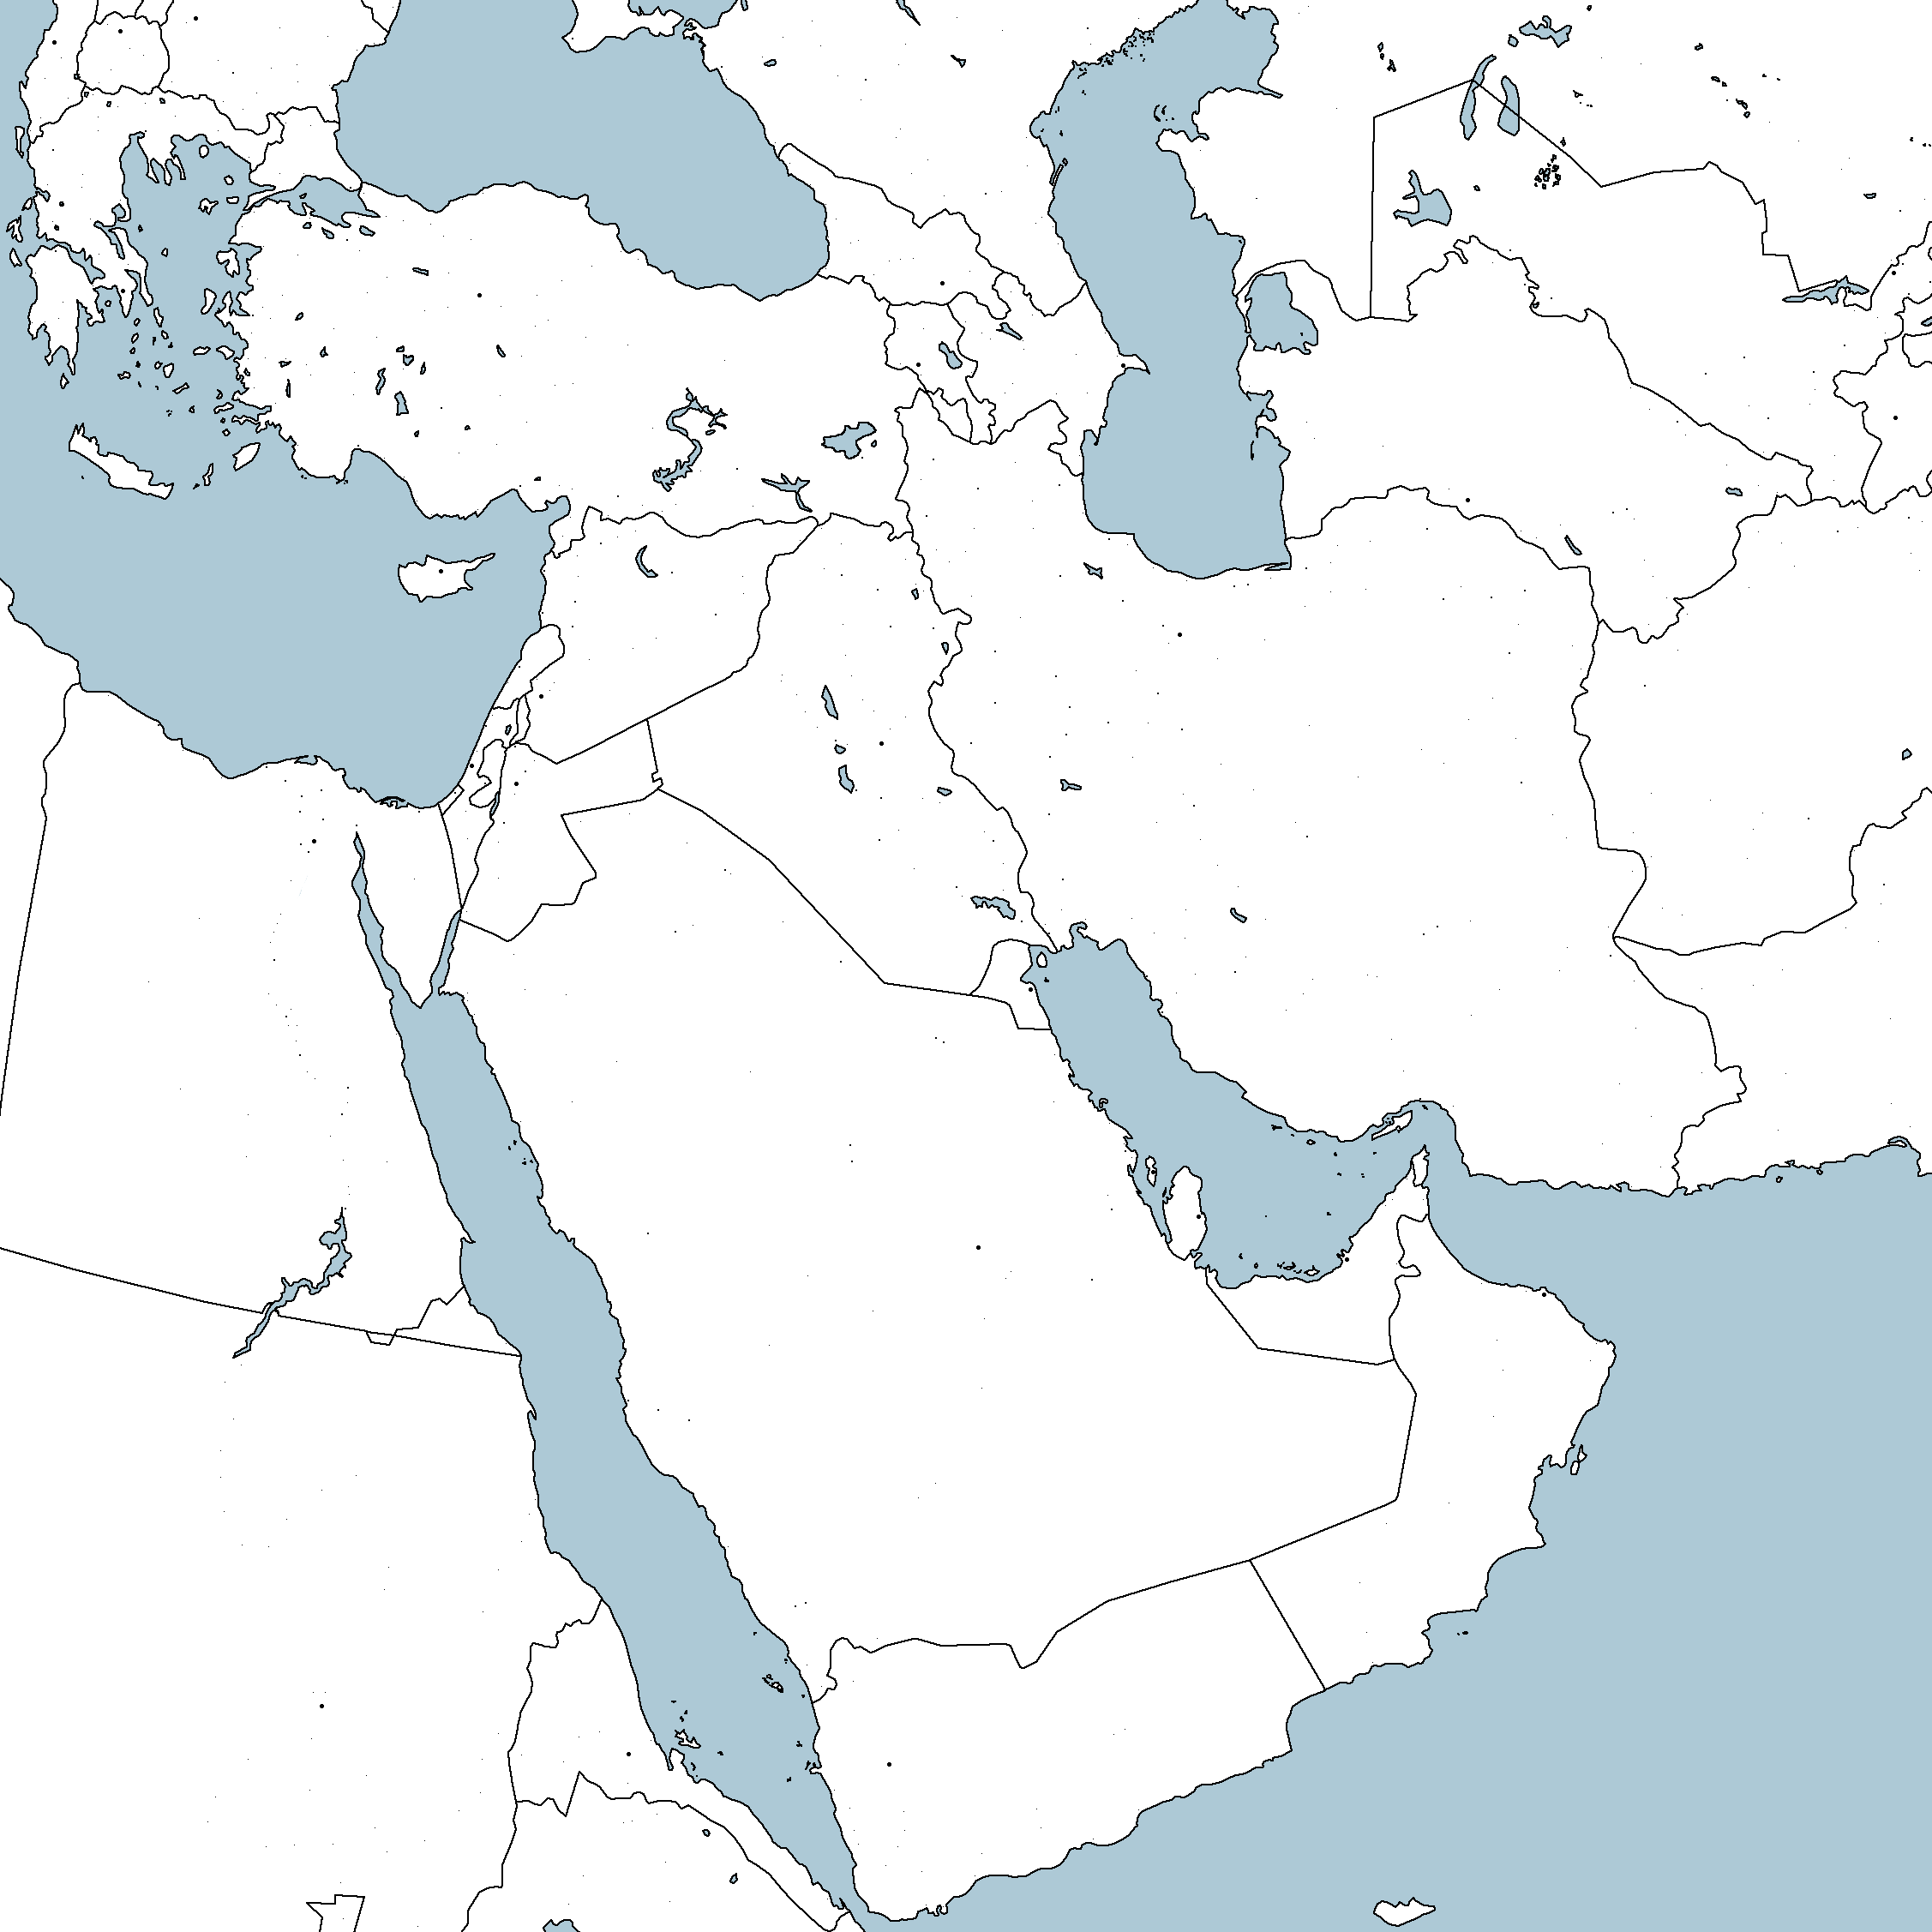 The Middle East [HD] by HarryM29 on DeviantArt